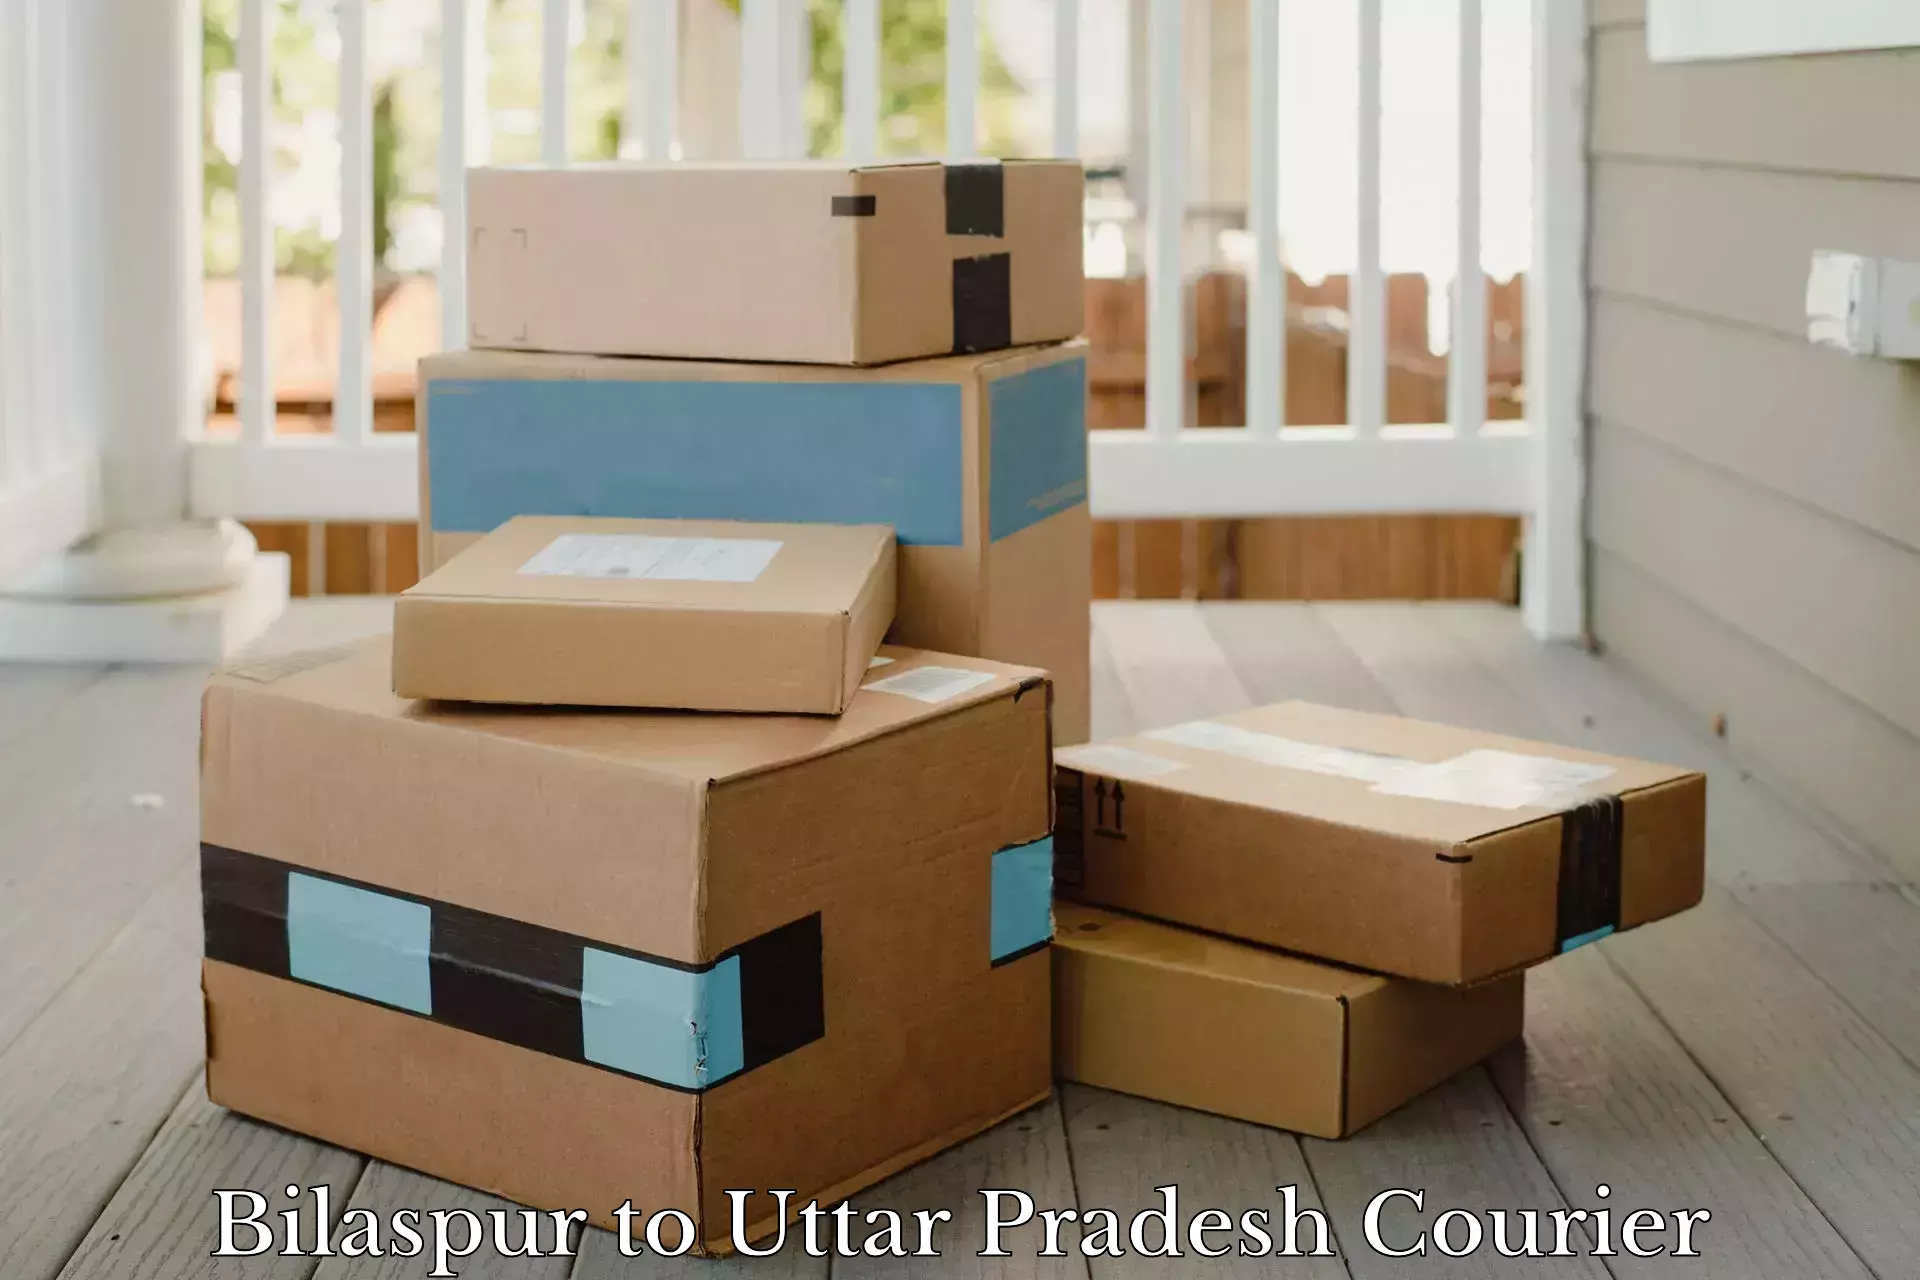 Customizable shipping options Bilaspur to Lucknow